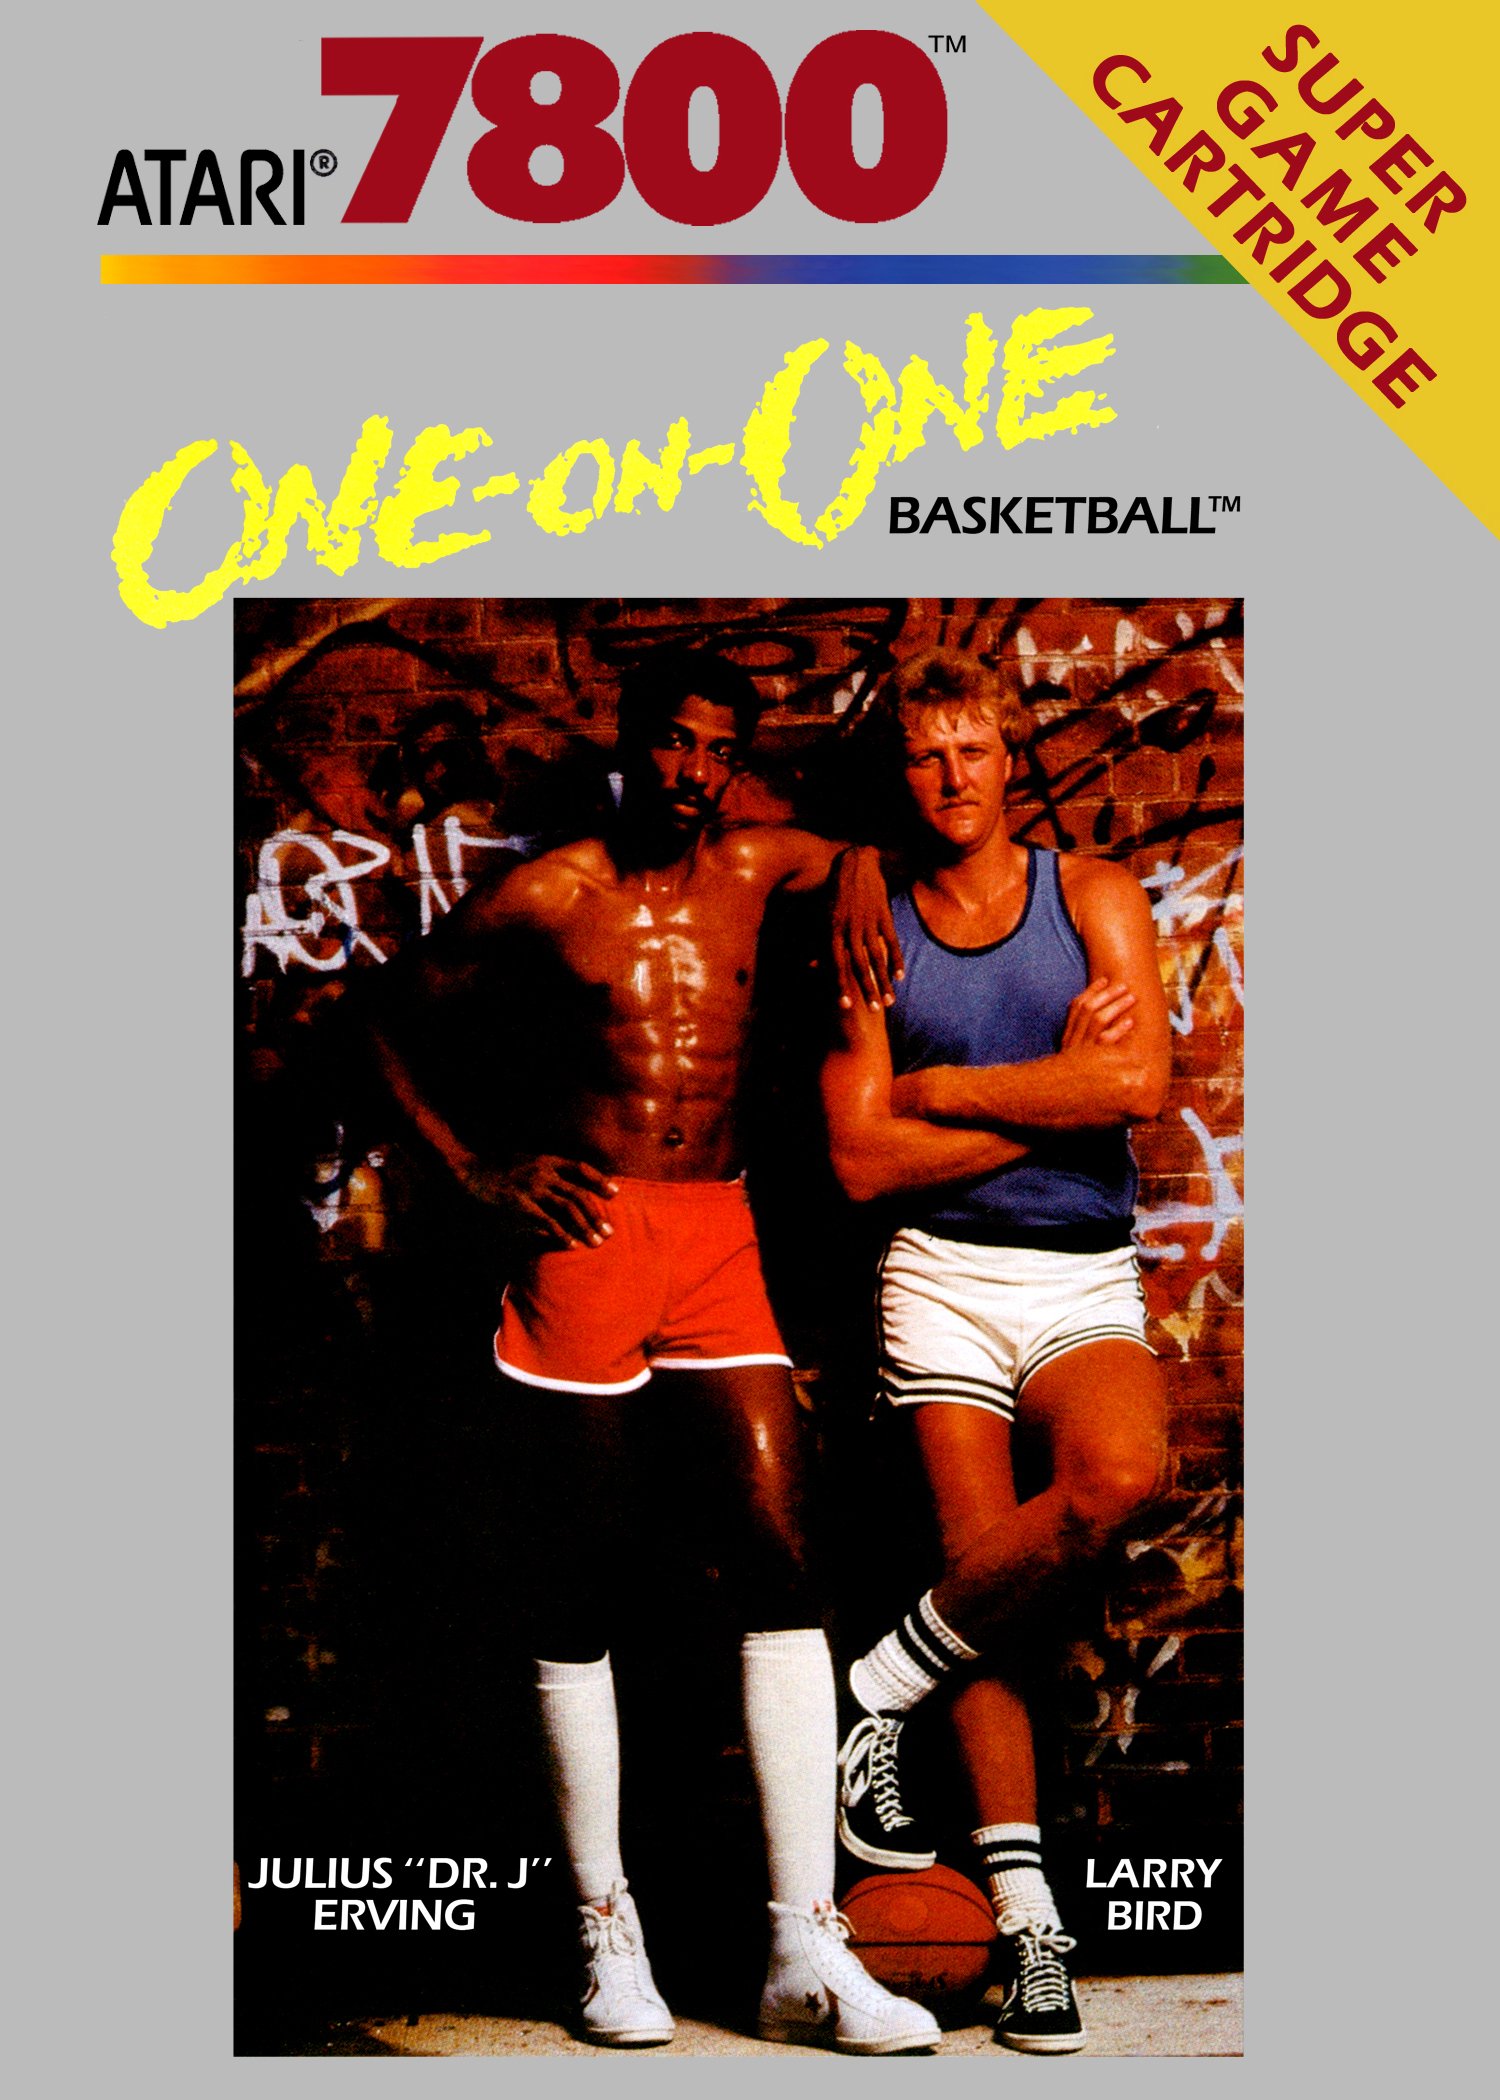 Image of One-on-One Basketball